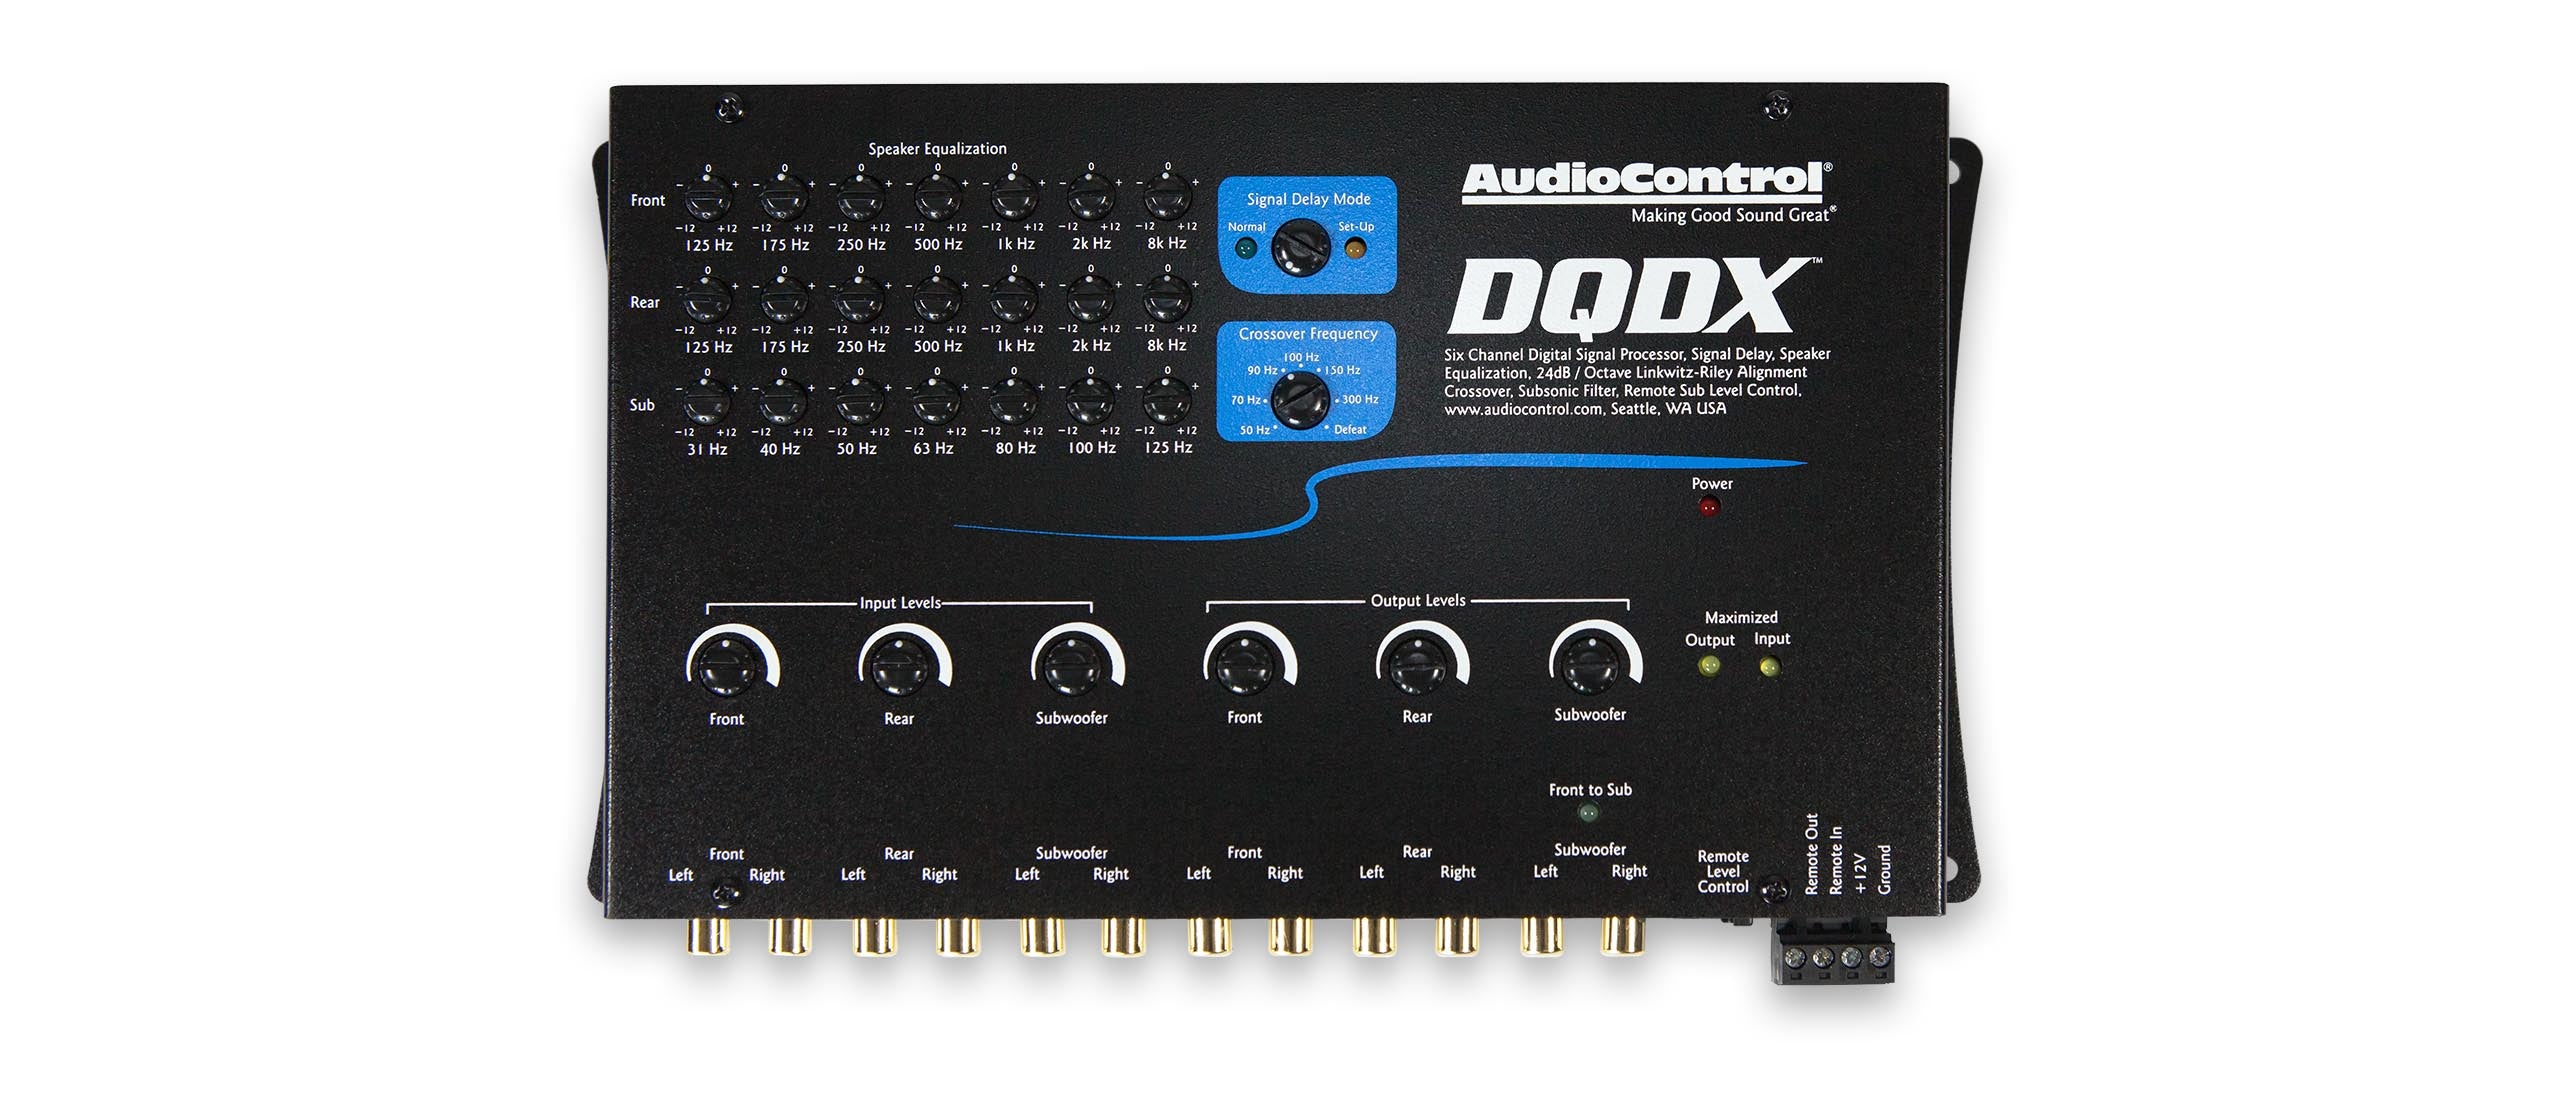 DQDX DSP | DIGITAL SOUND PROCESSOR WITH EQ, CROSSOVER, AND SIGNAL DELAY